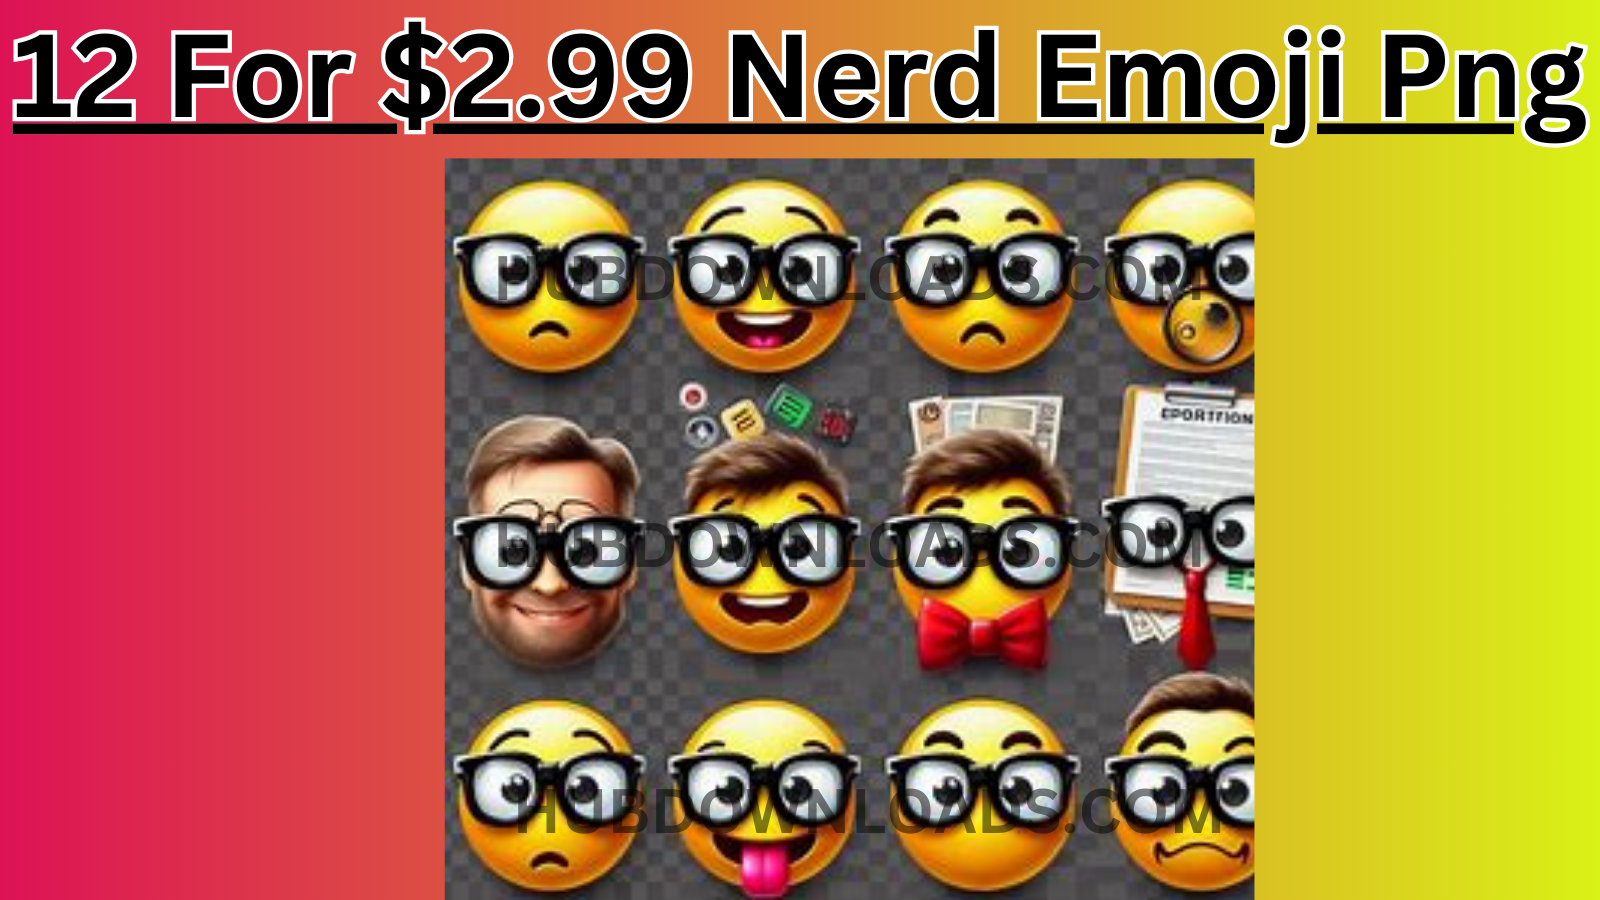 12 diverse nerd emojis in PNG format with transparent backgrounds for $2.99. Perfect for blogs, social media, and digital projects.